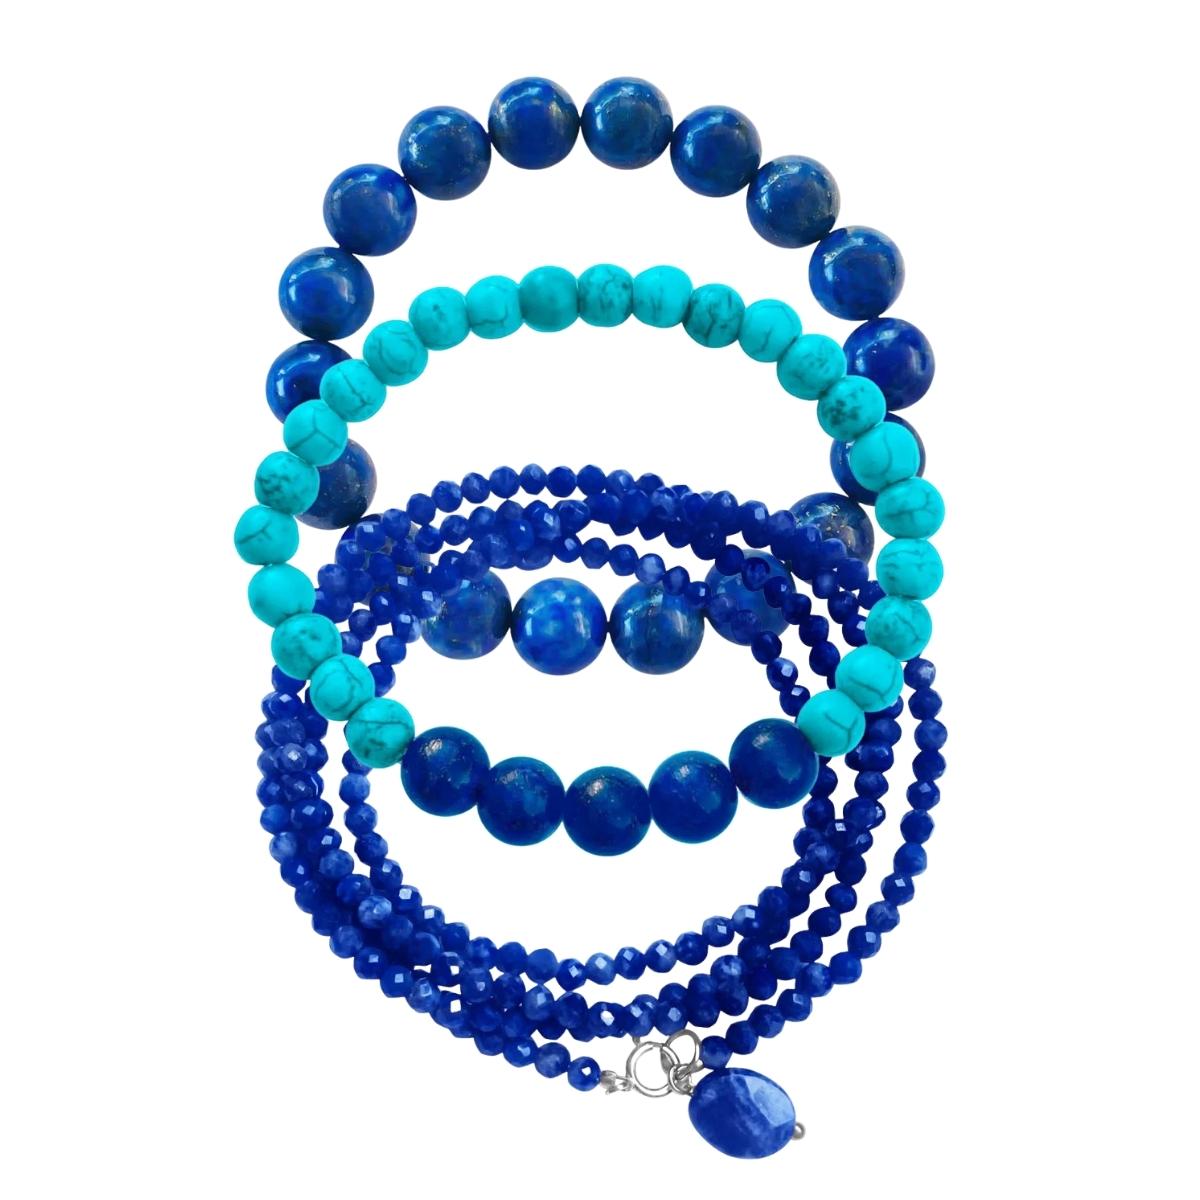 Intuitive Wisdom Gemstone Intention Bracelet Stack with Lapis Lazuli and Turquoise